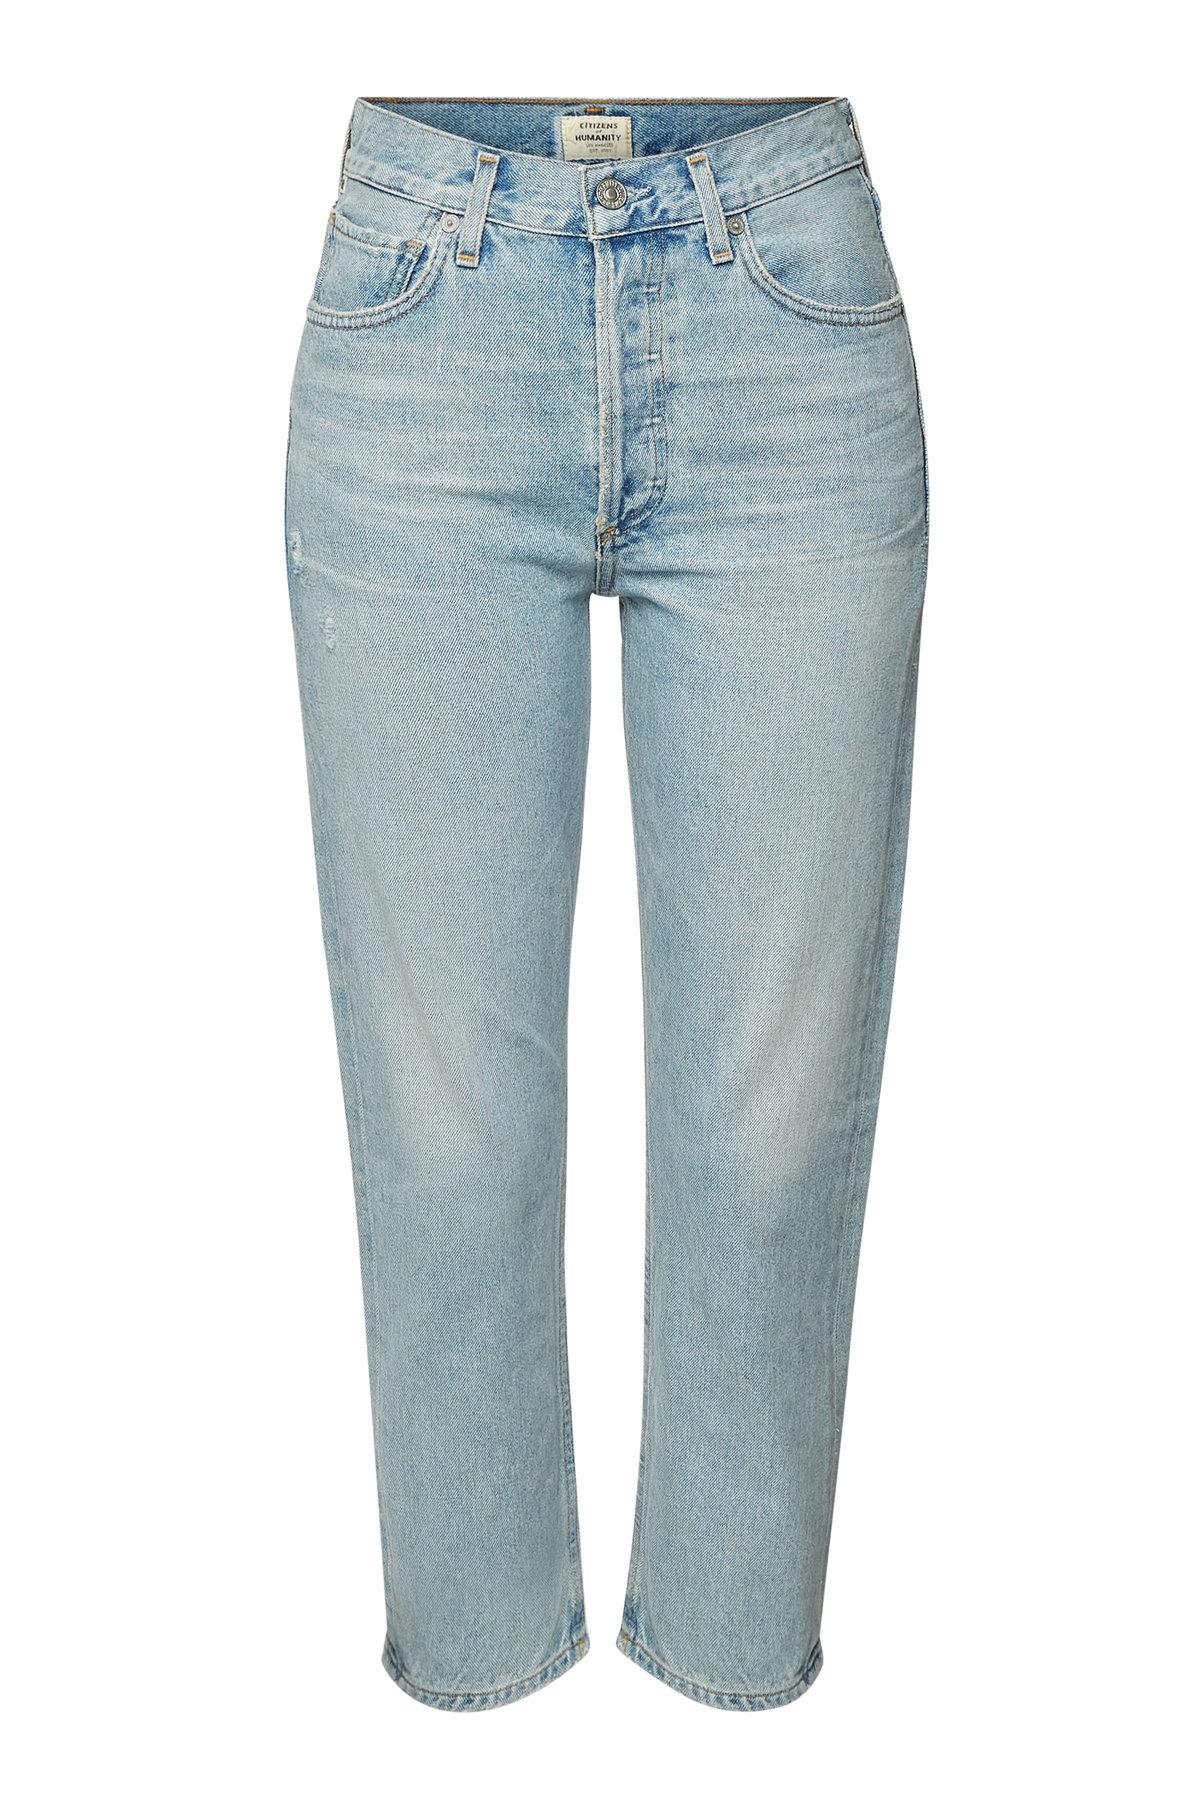 Lyst - Citizens of Humanity Charlotte Cropped Straight Leg Jeans in Blue